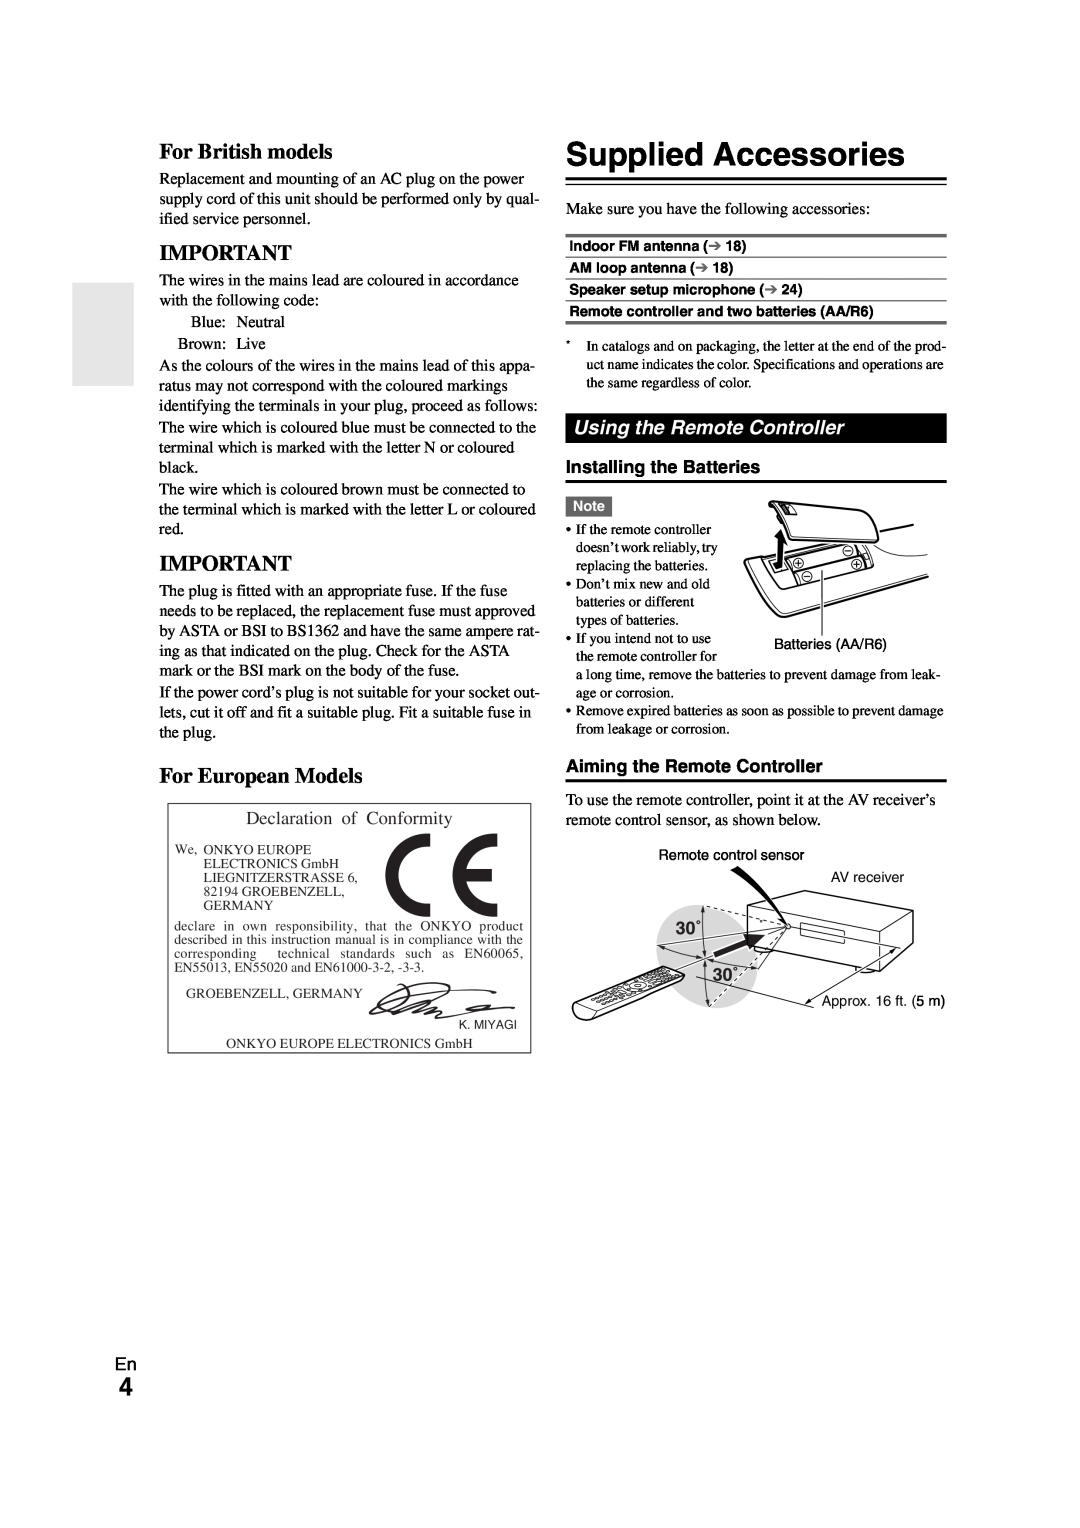 Onkyo HT-R980 instruction manual Supplied Accessories, For British models, For European Models, Using the Remote Controller 